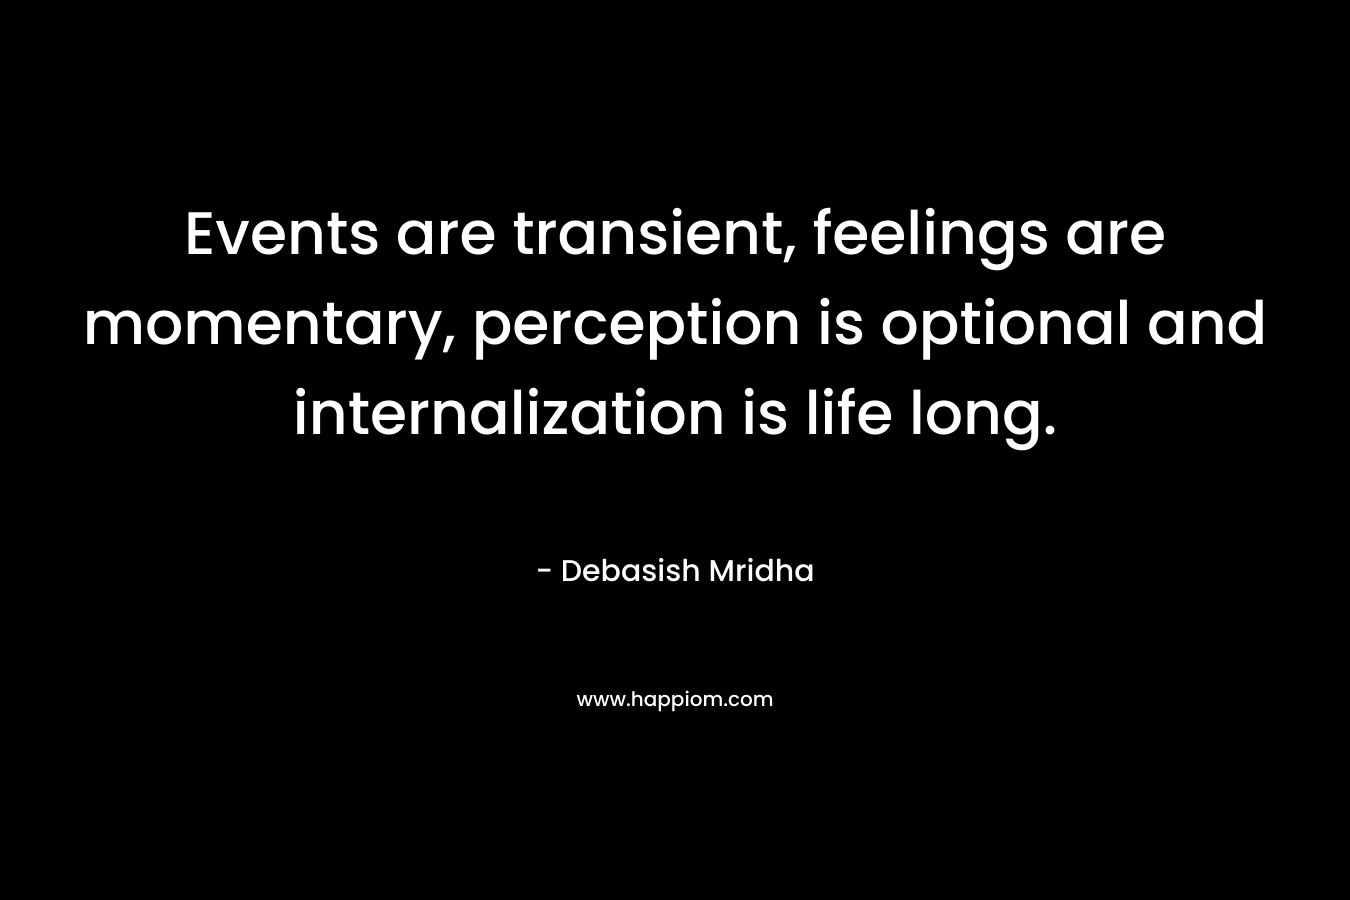 Events are transient, feelings are momentary, perception is optional and internalization is life long.